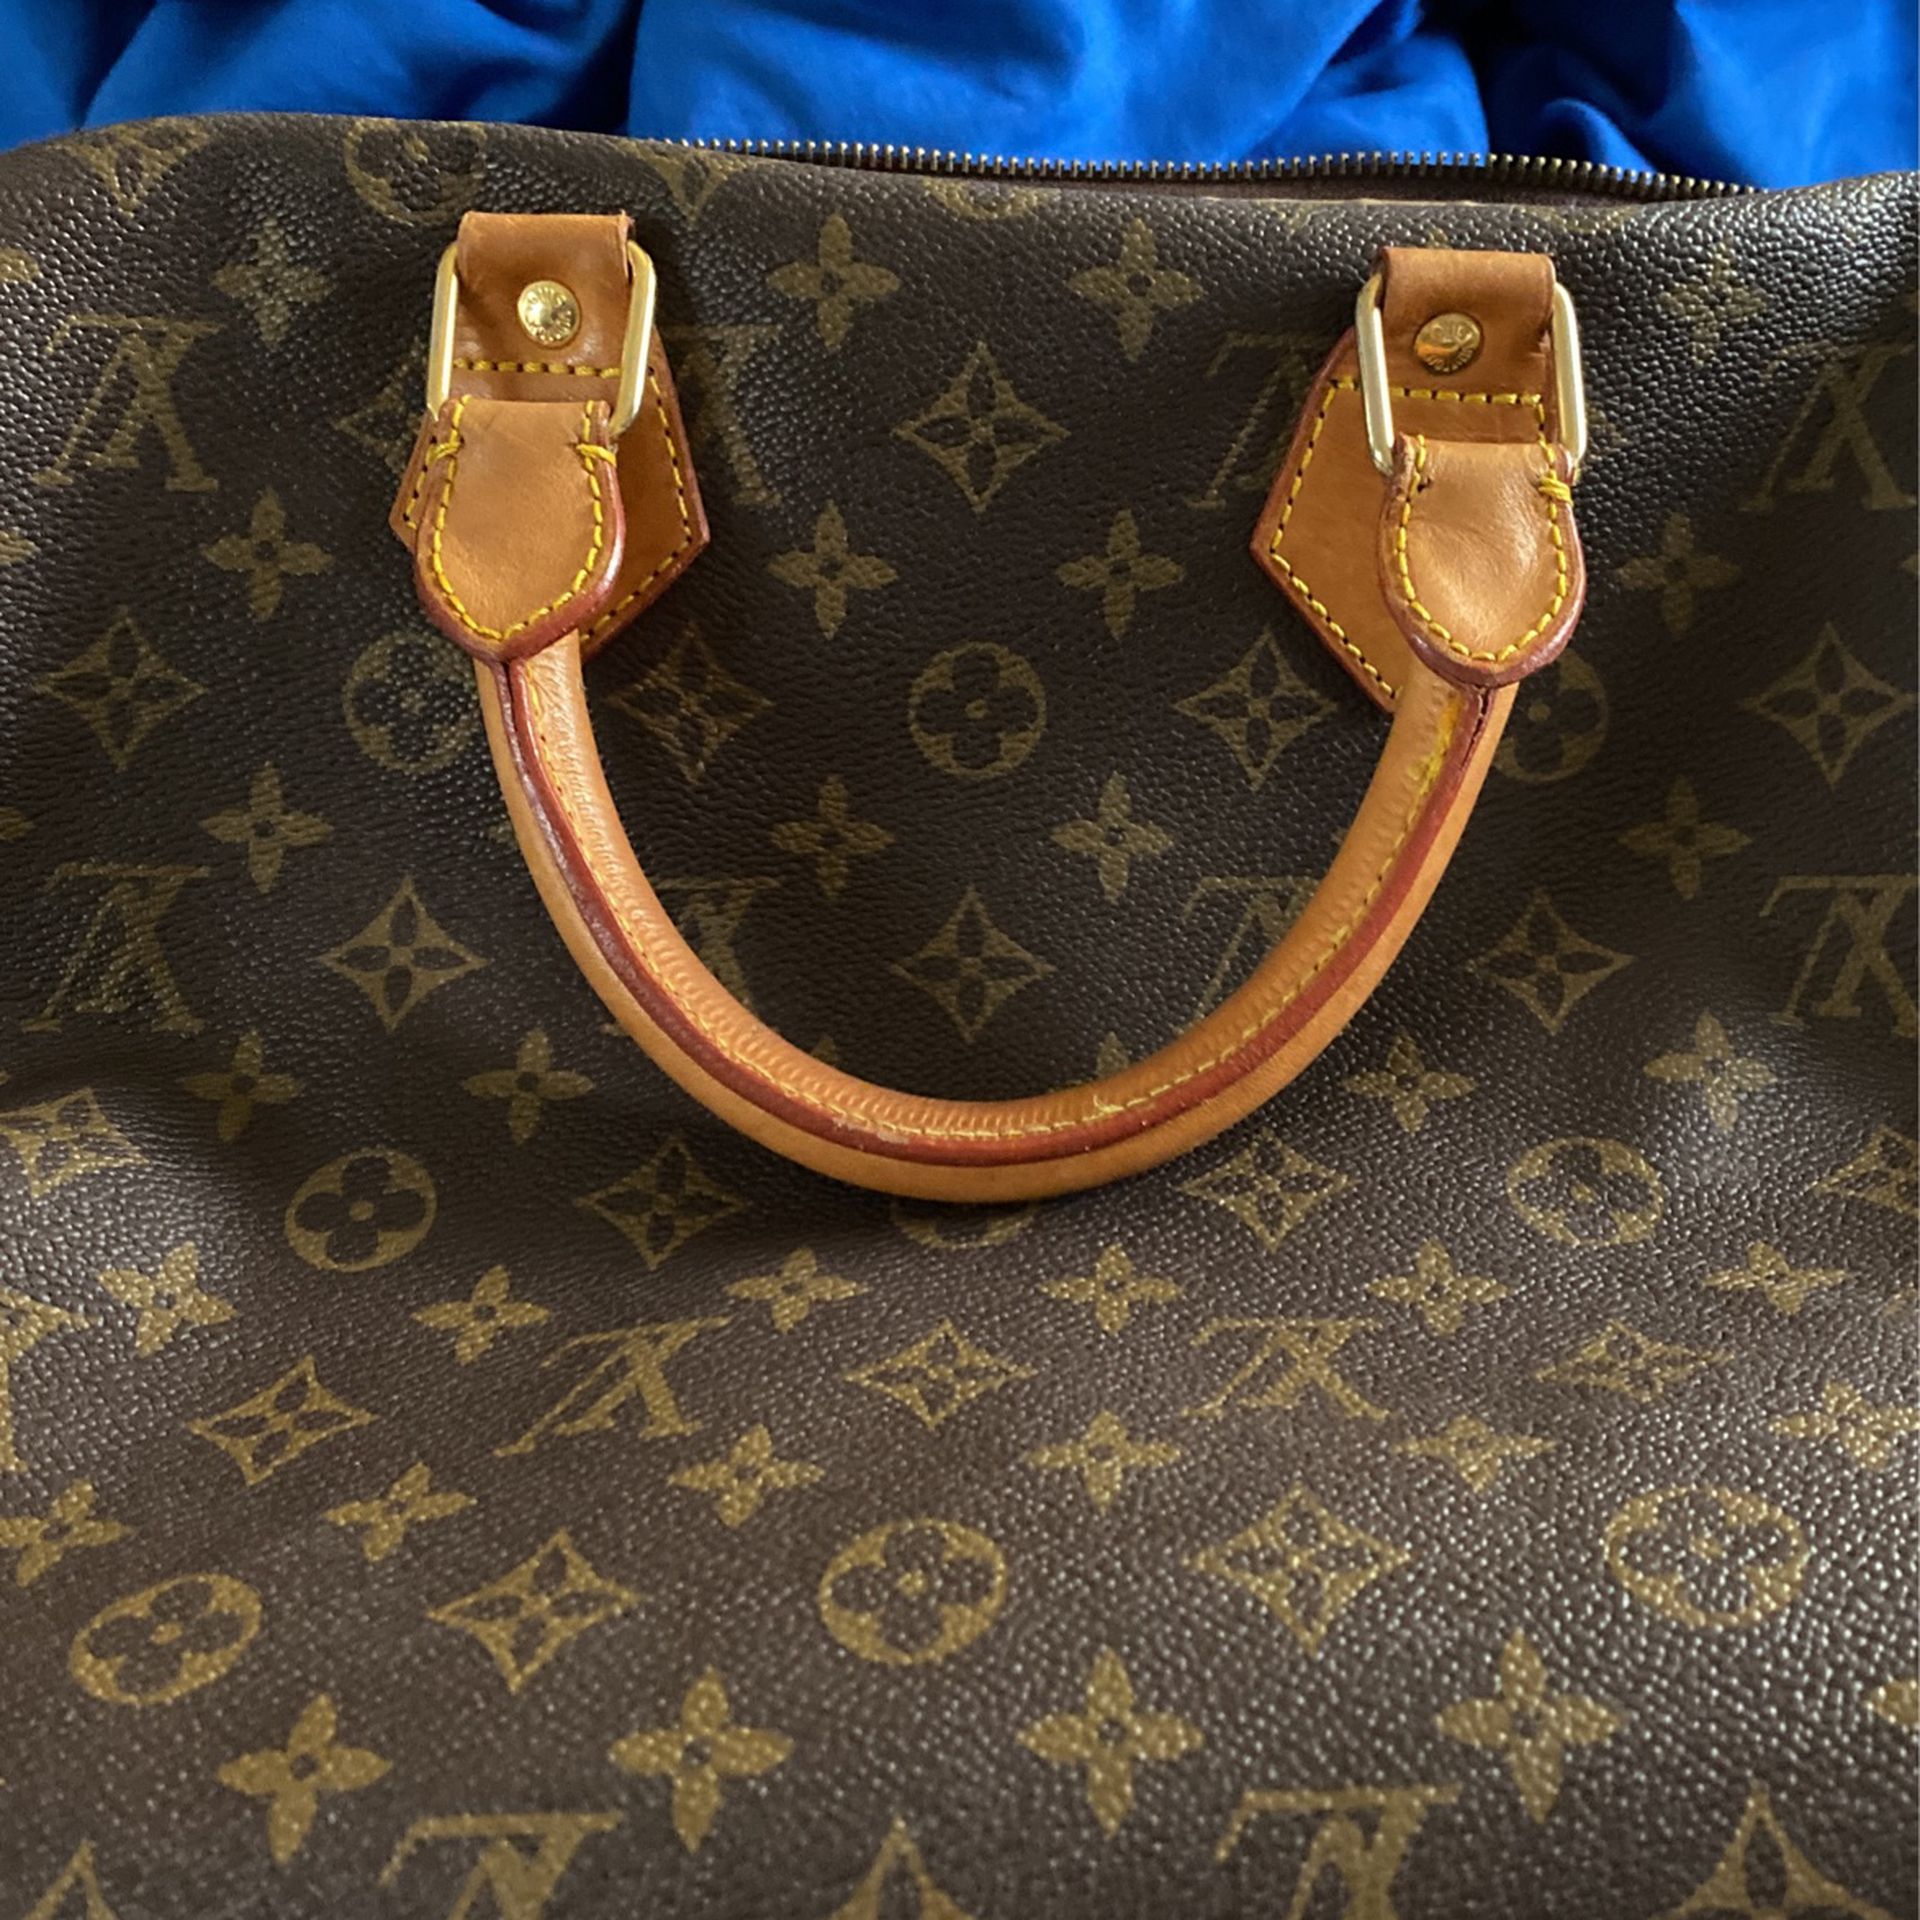 Louis Vuitton Duffle Travel Bag for Sale in Rancho Cucamonga, CA - OfferUp